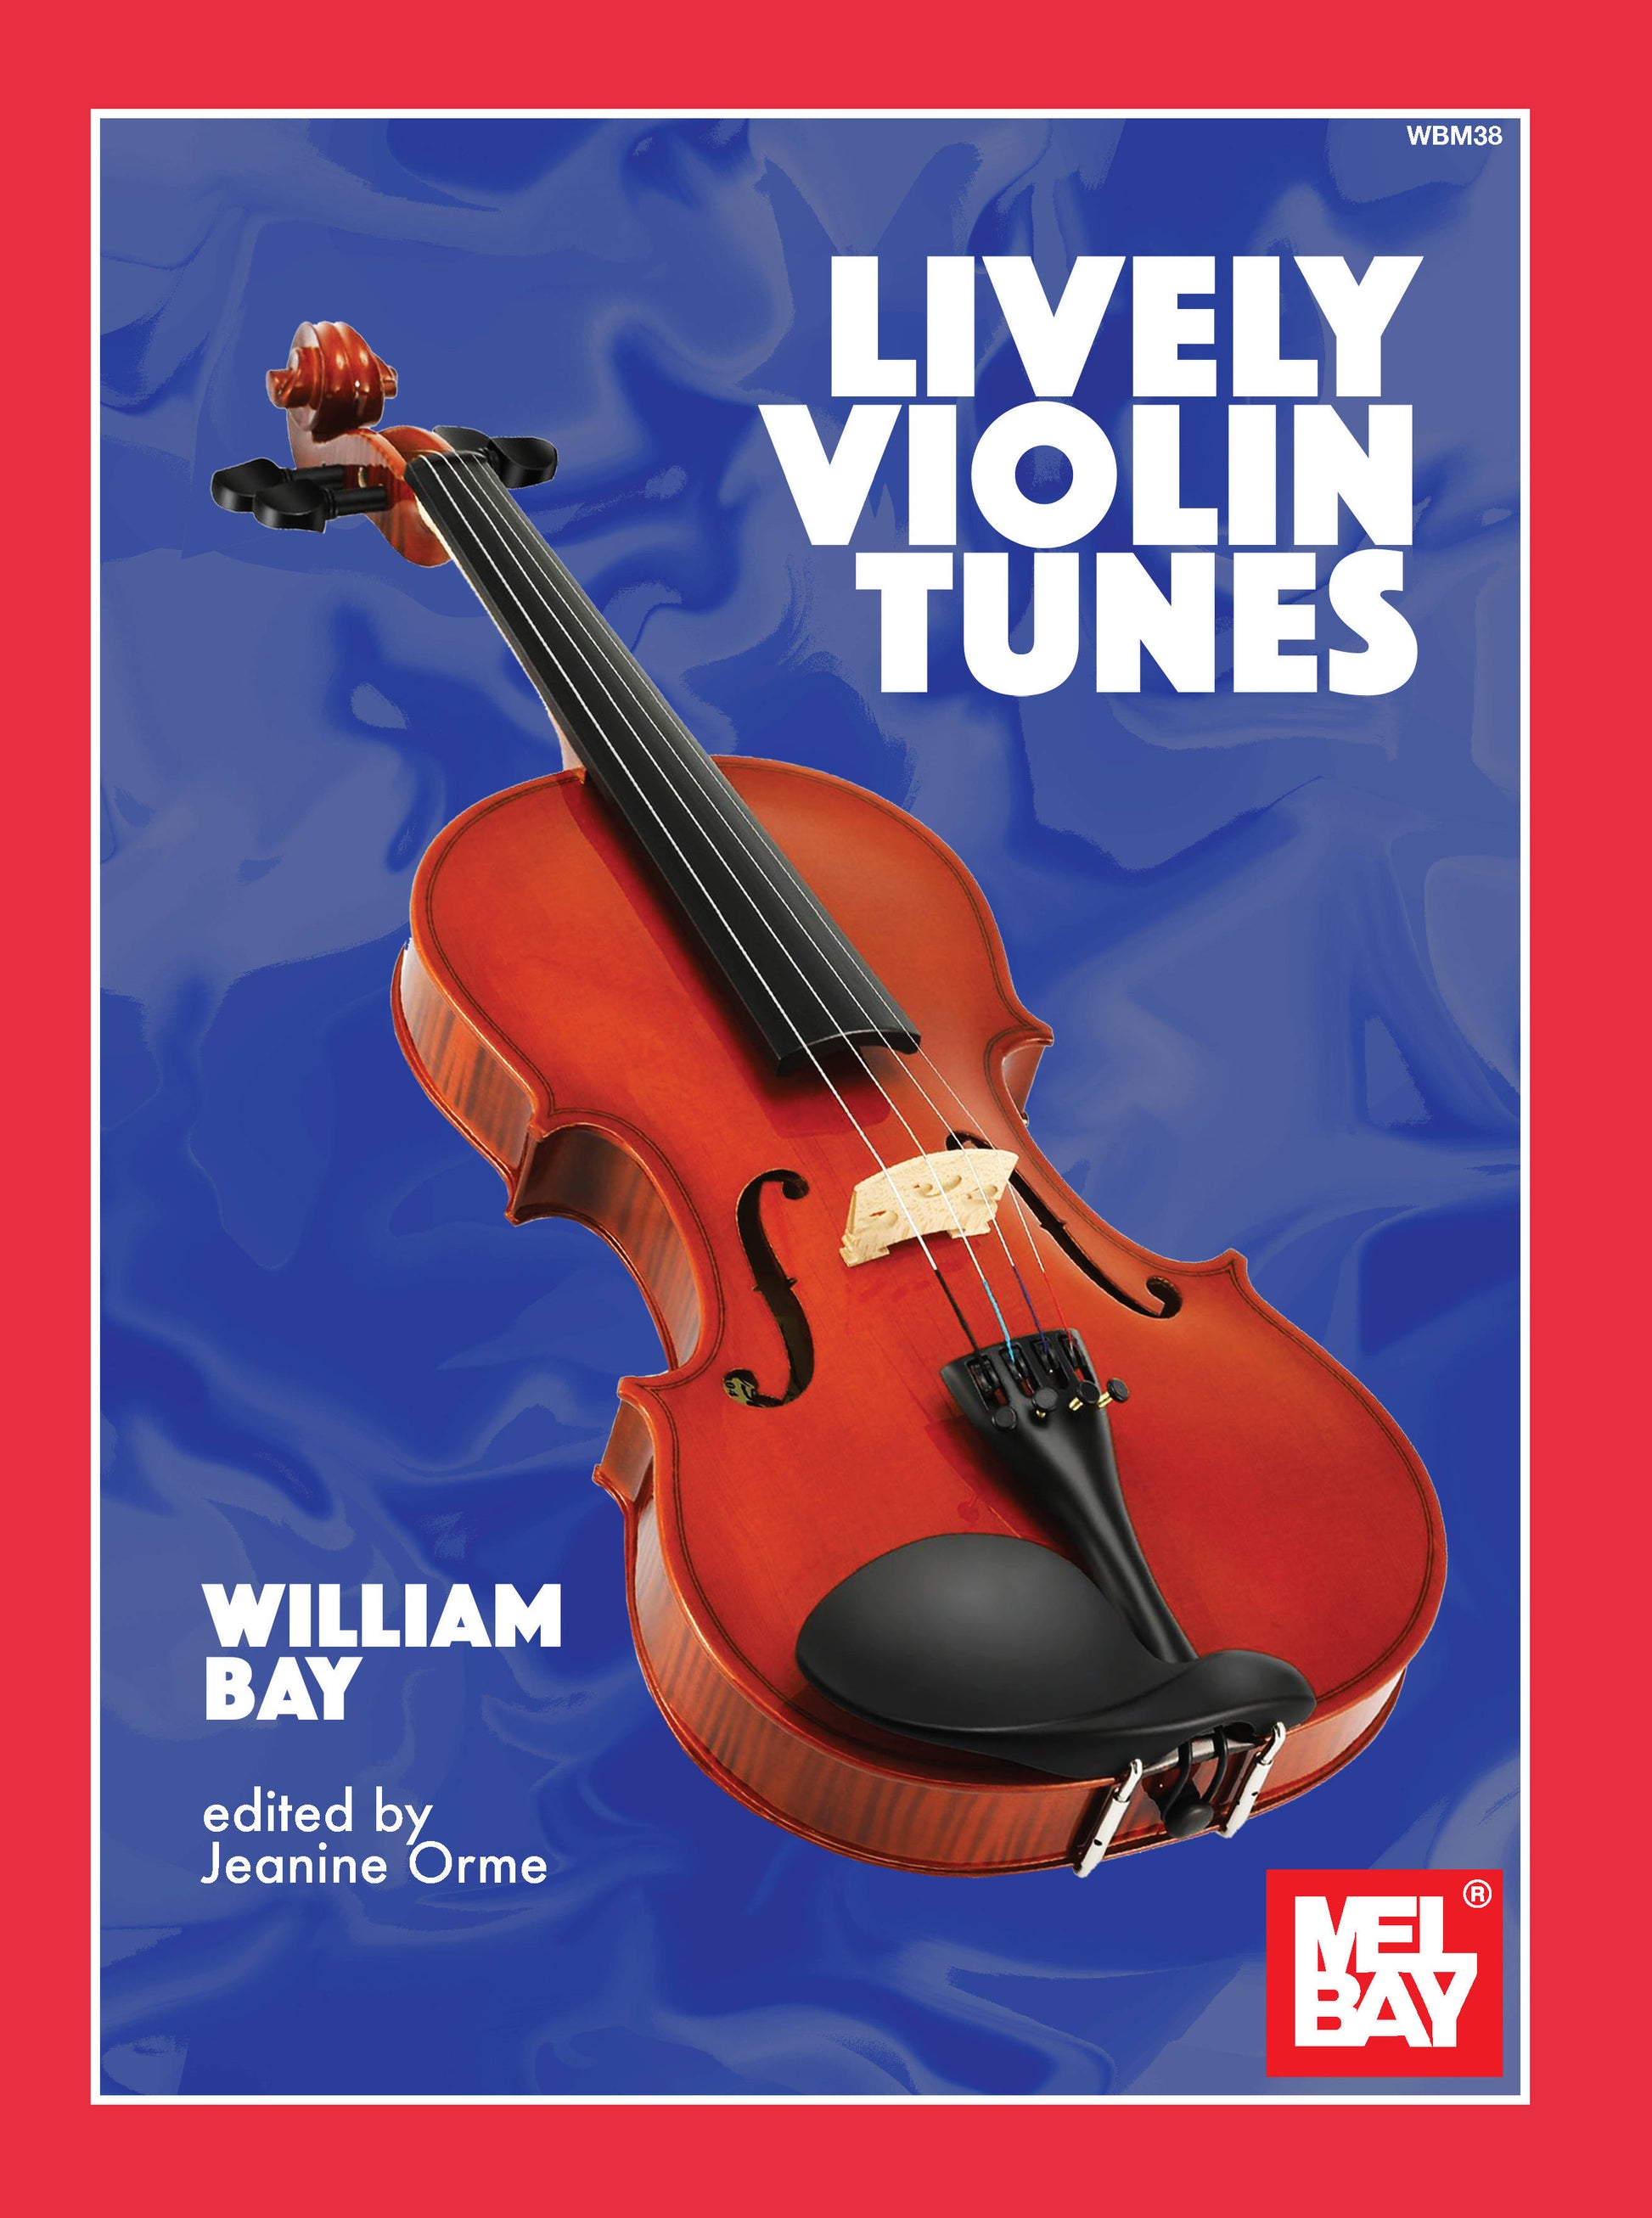 Image 1 of Lively Violin Tunes - SKU# 02-1038 : Product Type Media : Elderly Instruments